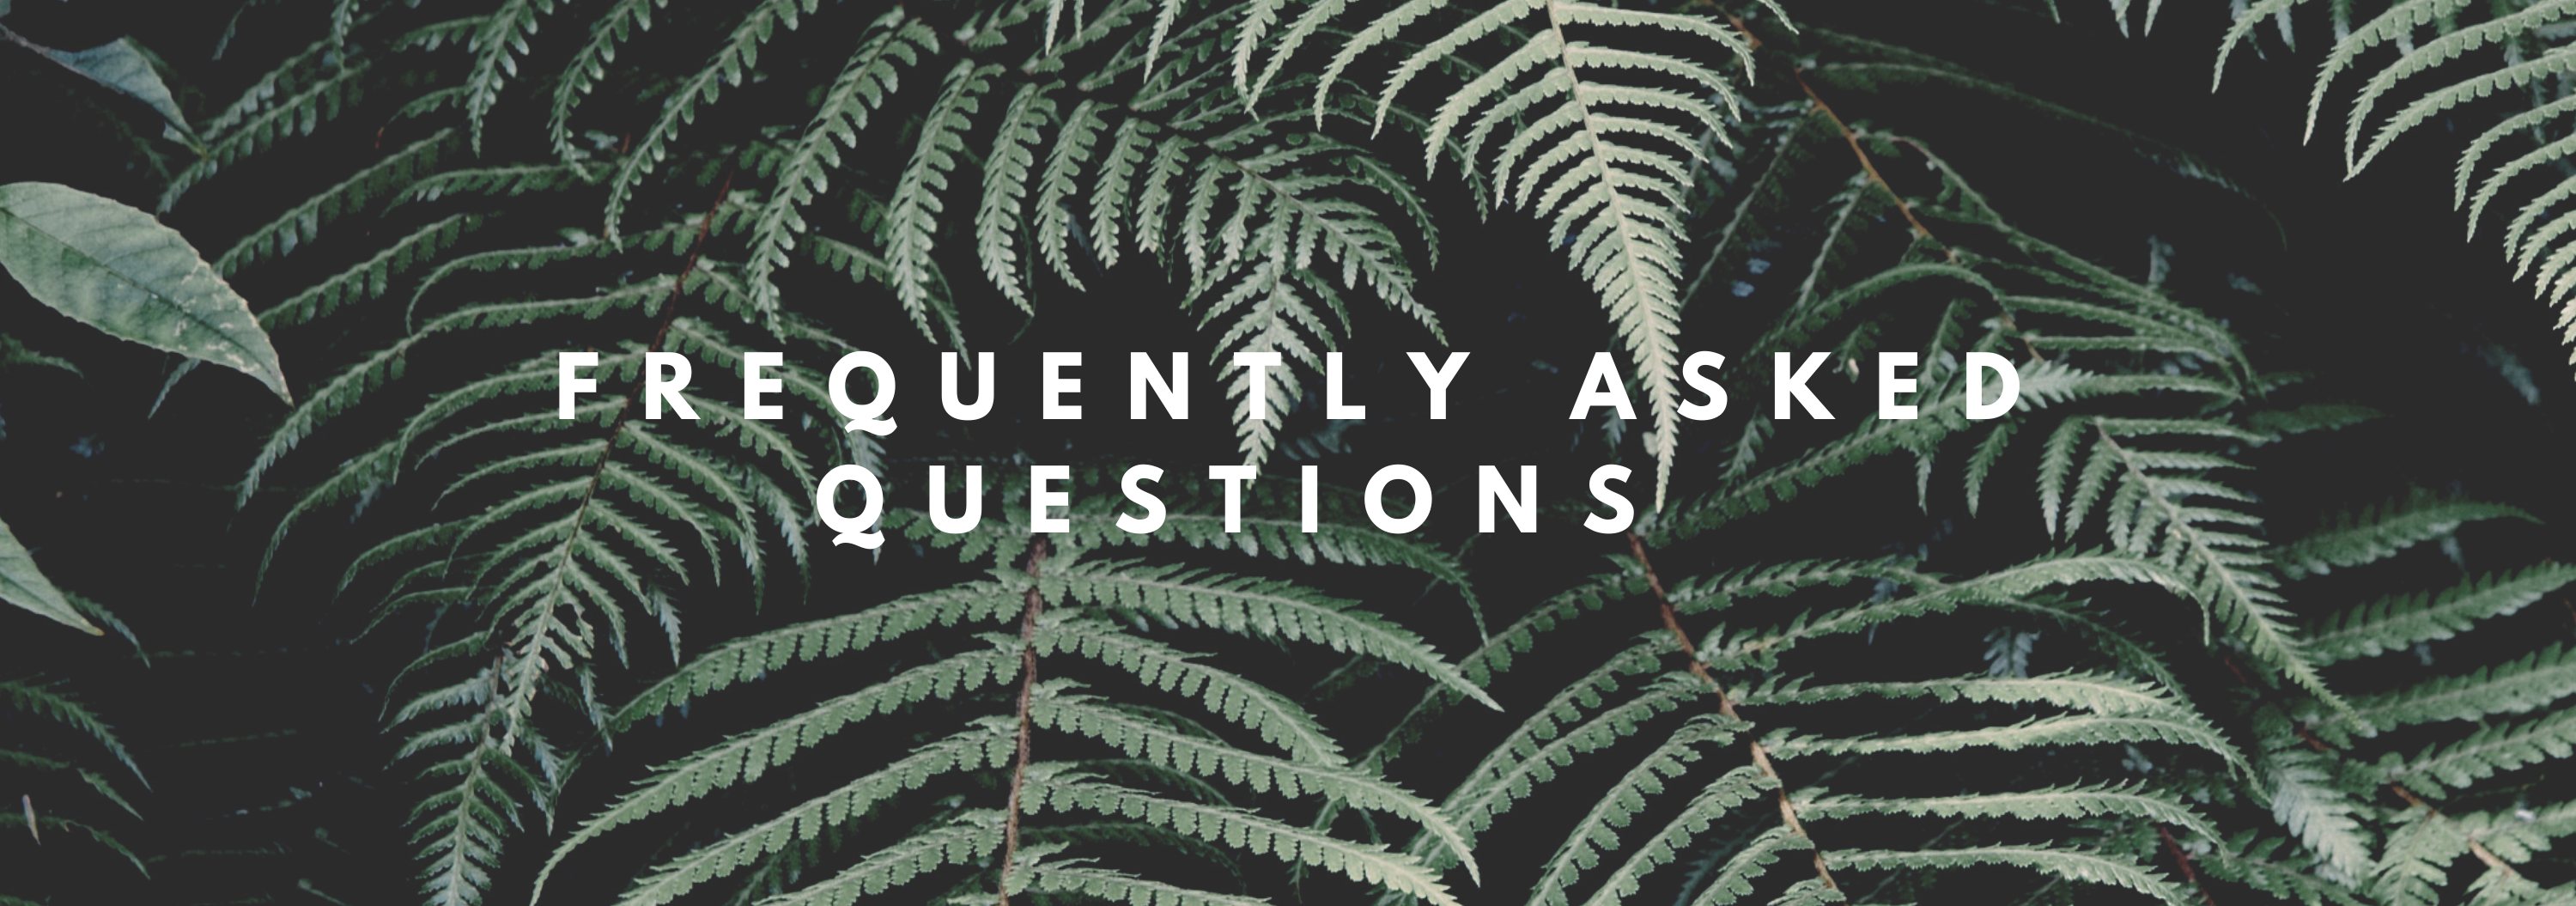 Frequently asked questions 